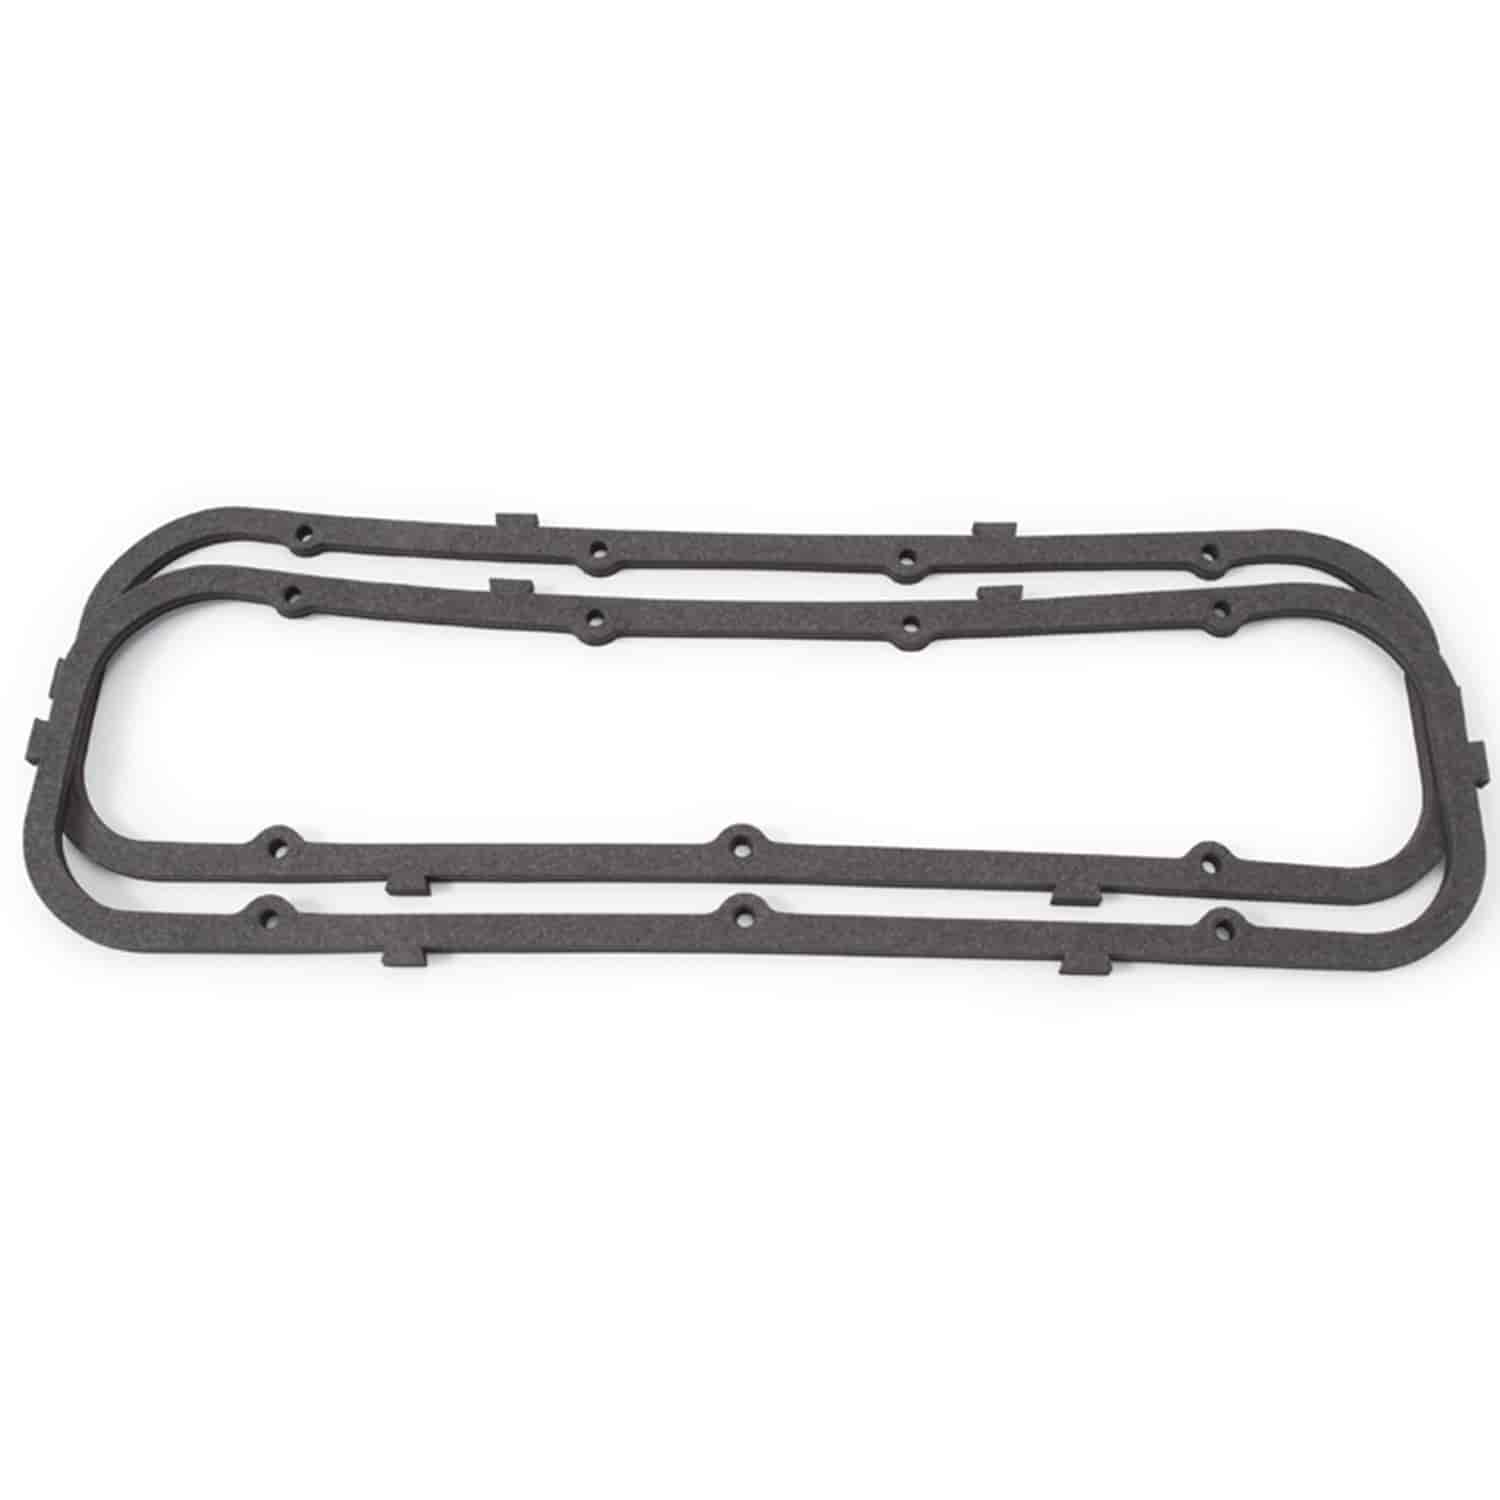 Valve Cover Gaskets for Big Block Chevy